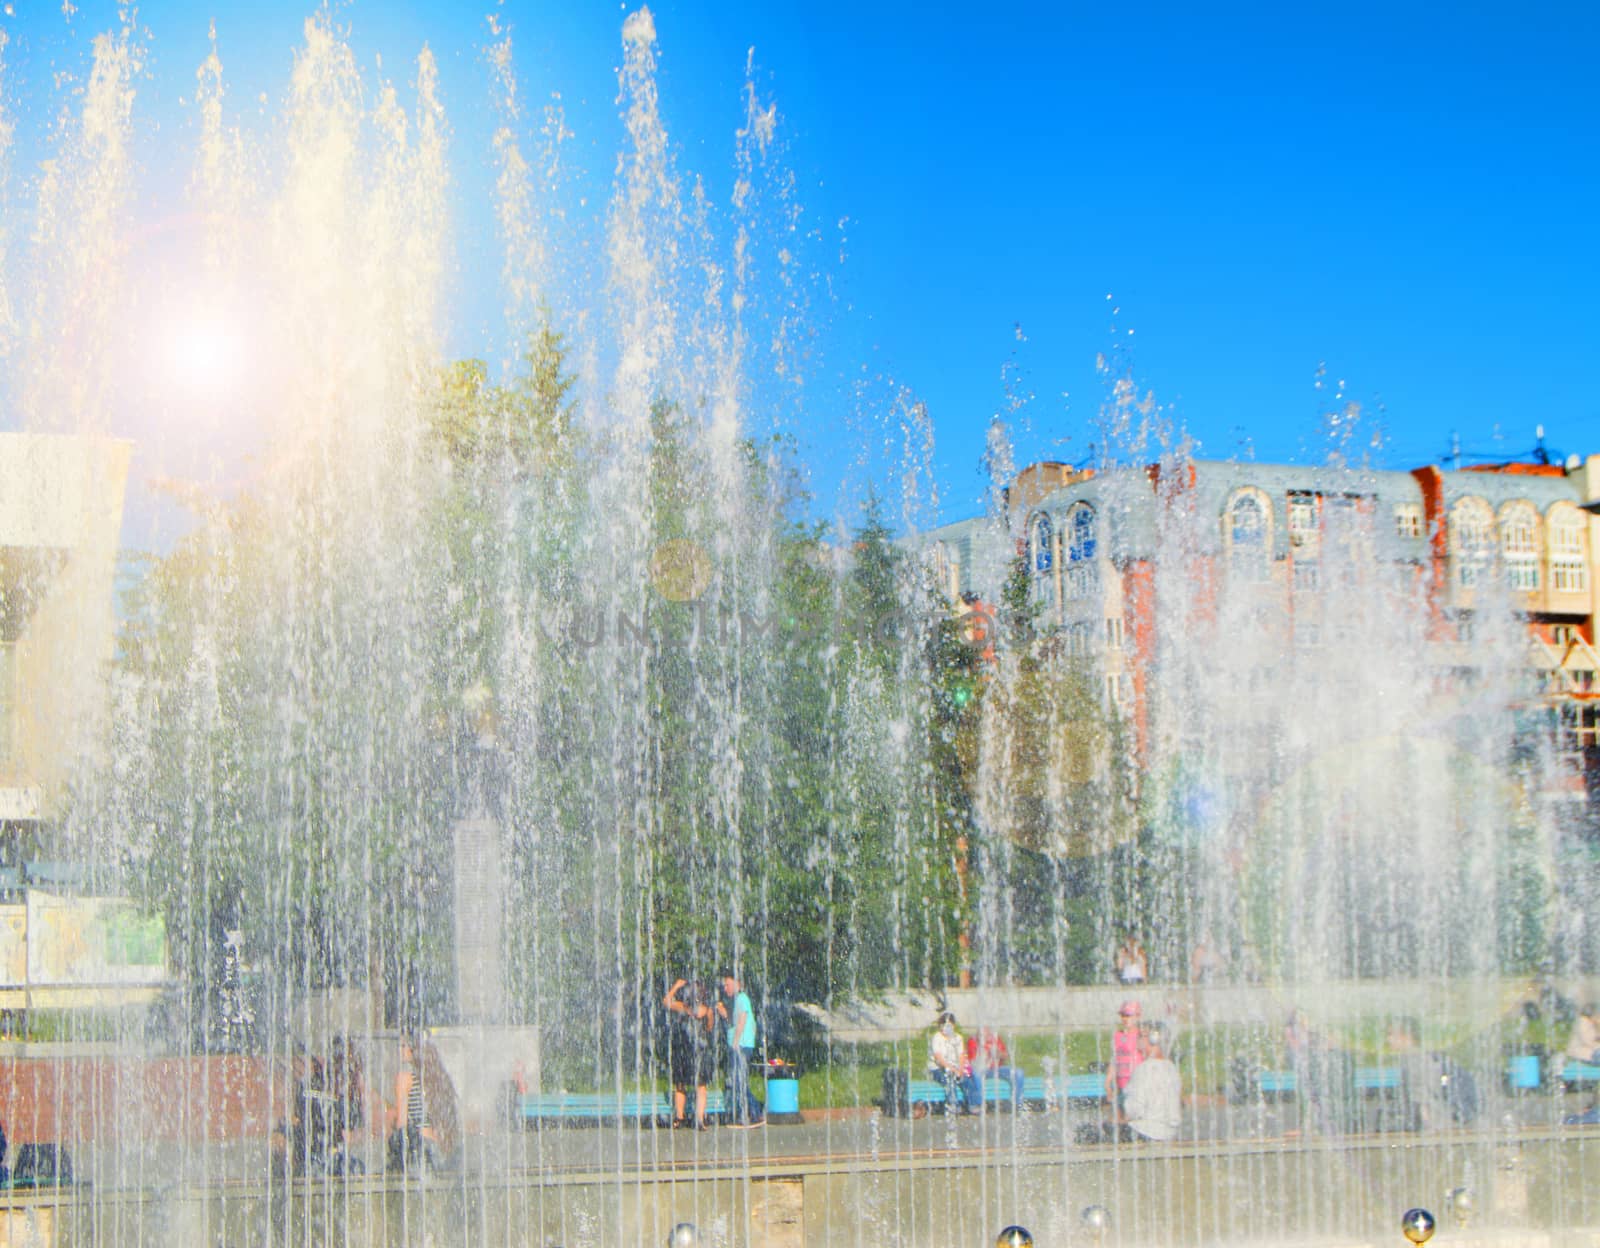 City fountain with water jets and random people, view through splashes on Sunny summer day.